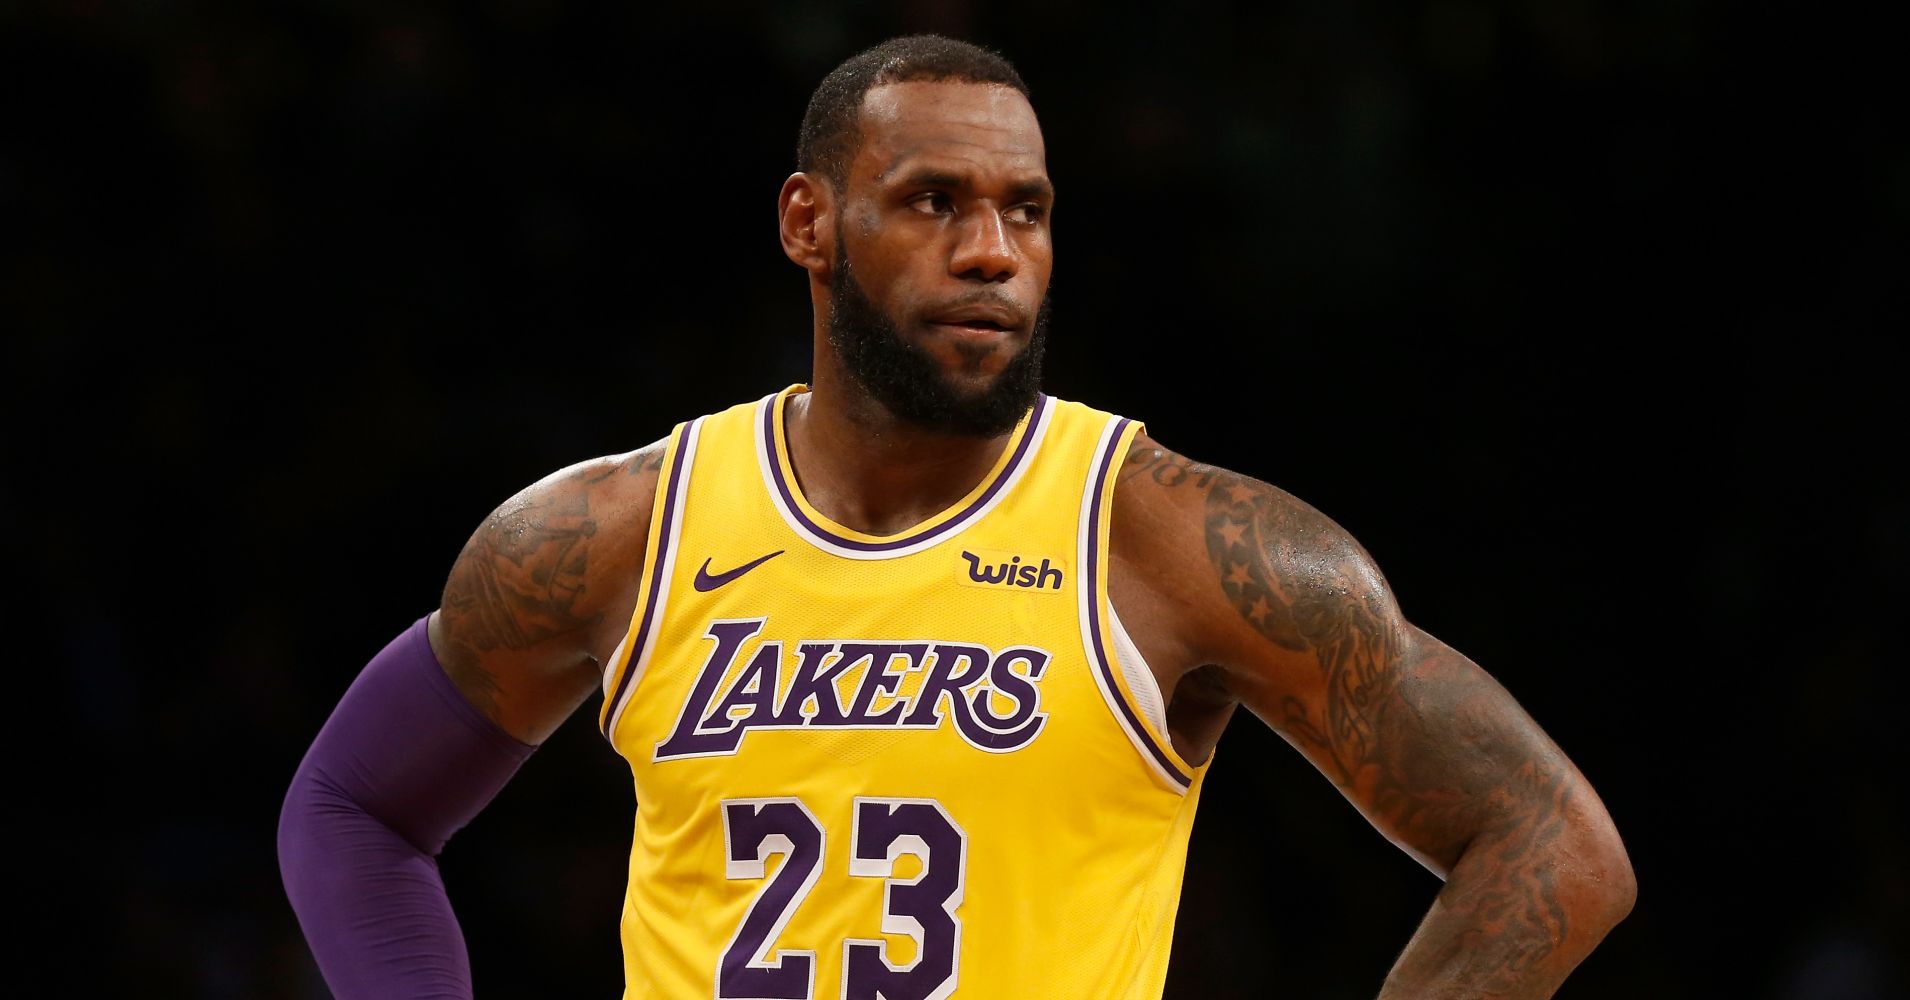  LeBron  James  Jared Dudley Held Out of Lakers Practice 